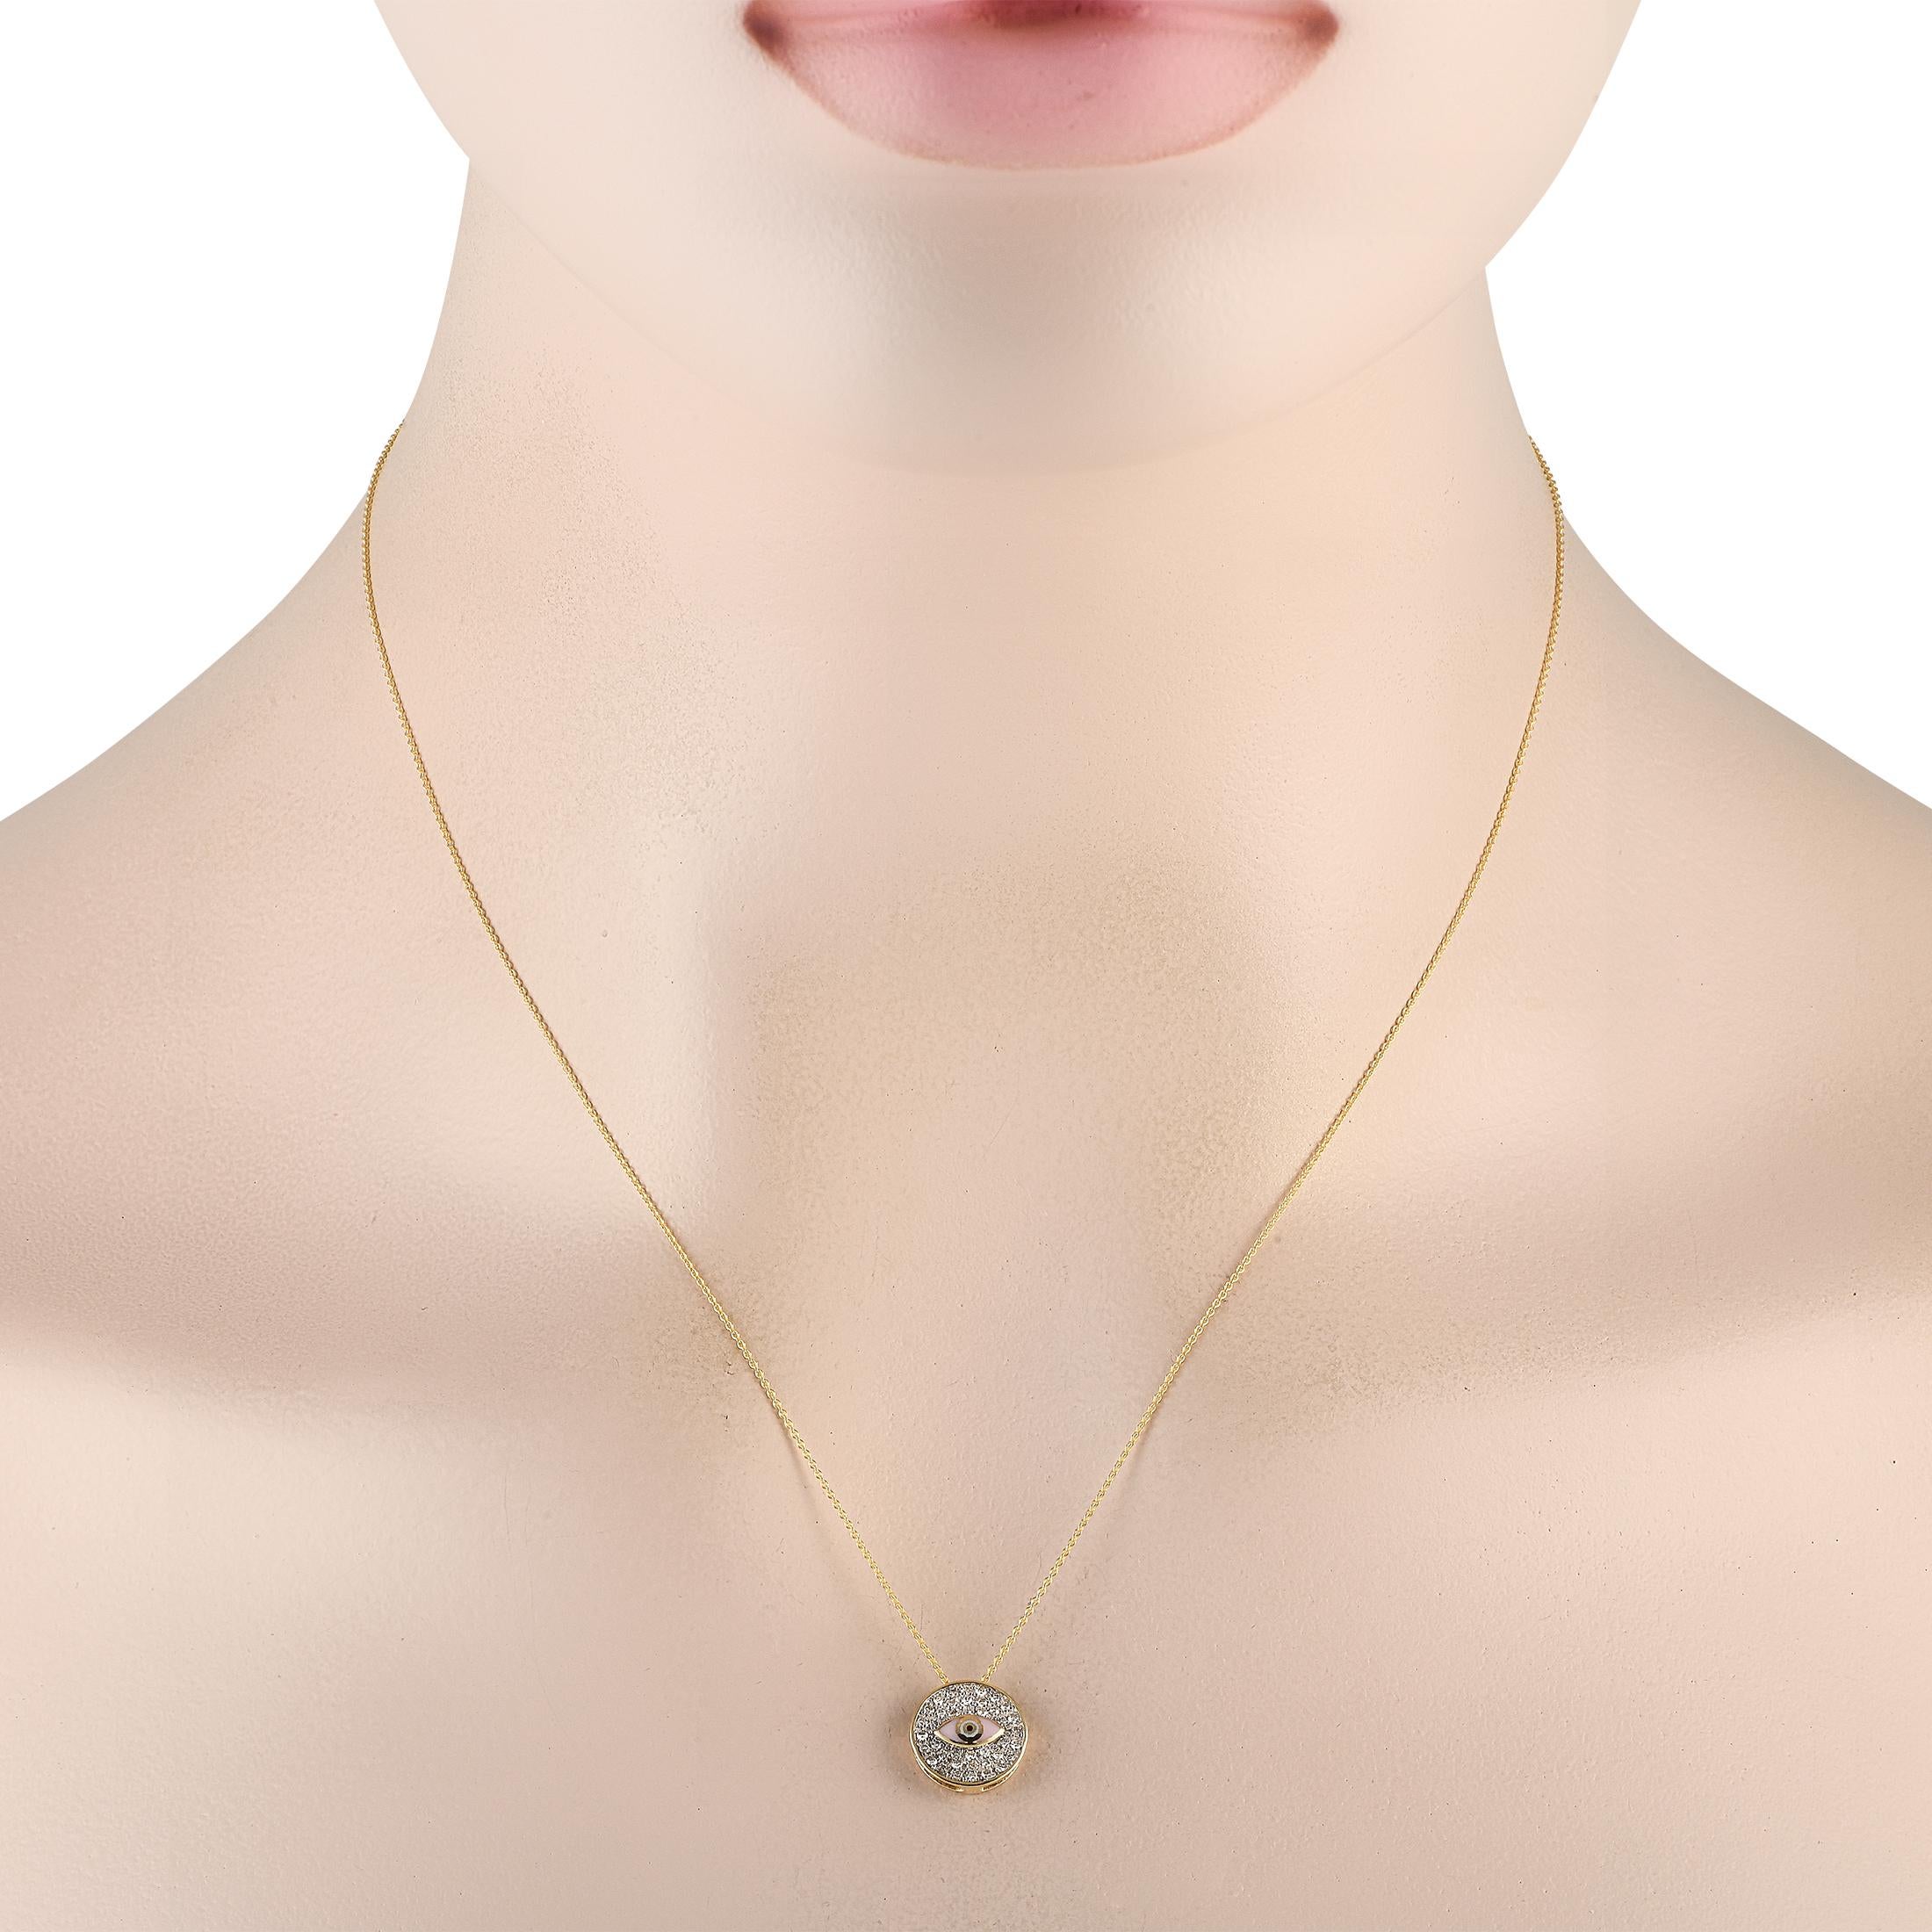 At the center of this necklaces round pendant, an exquisite eye accent serves as a stunning focal point. Crafted from 14K Yellow Gold, the pendant measures 0.45 round and comes to life thanks to inset diamonds totaling 0.20 carats. This piece